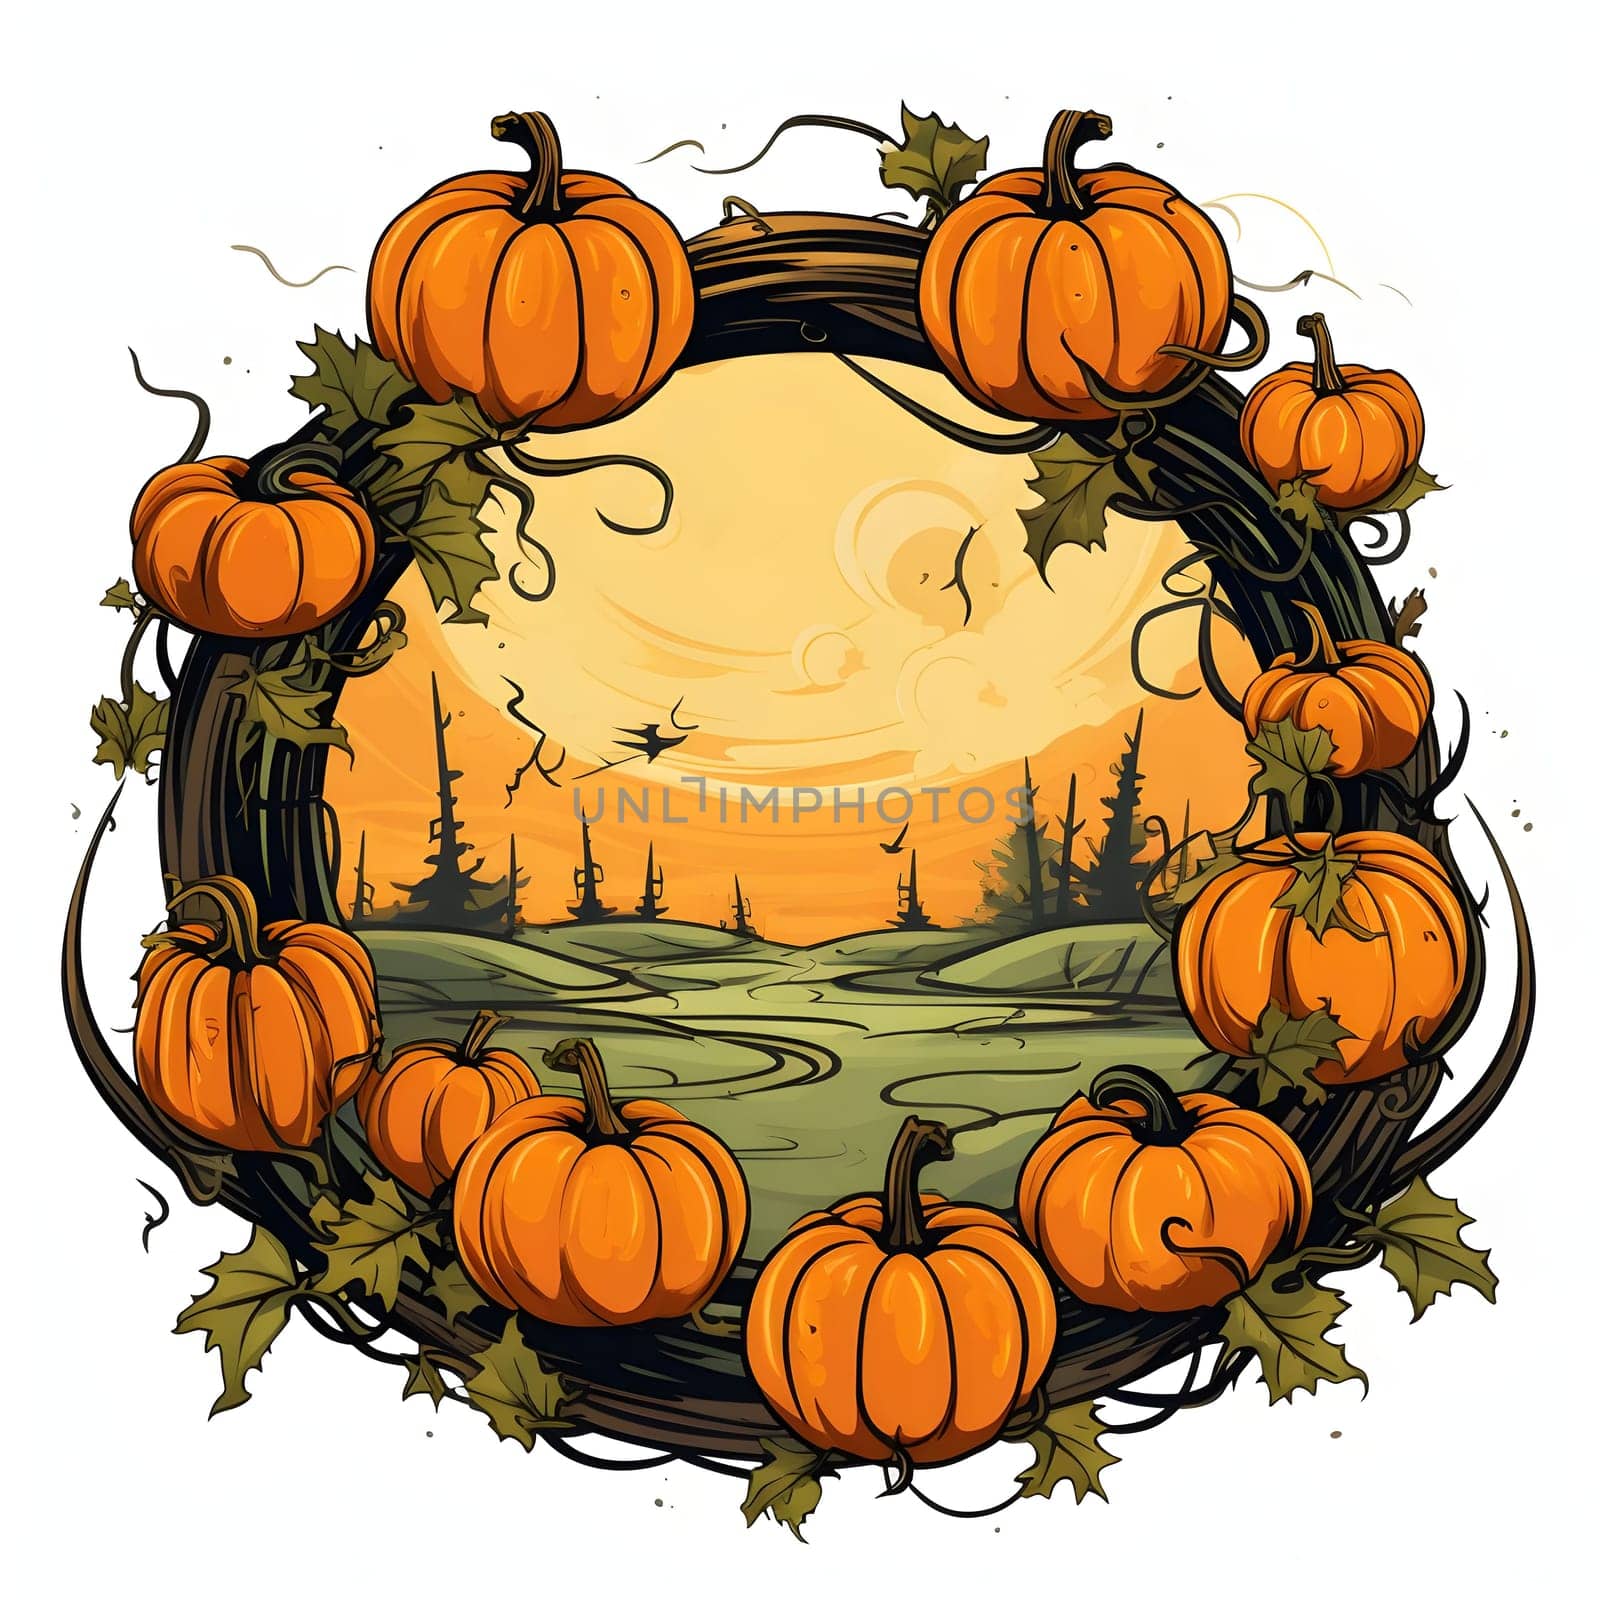 Landscape in Green frame with vines and pumpkins. Pumpkin as a dish of thanksgiving for the harvest, picture on a white isolated background. Atmosphere of joy and celebration.